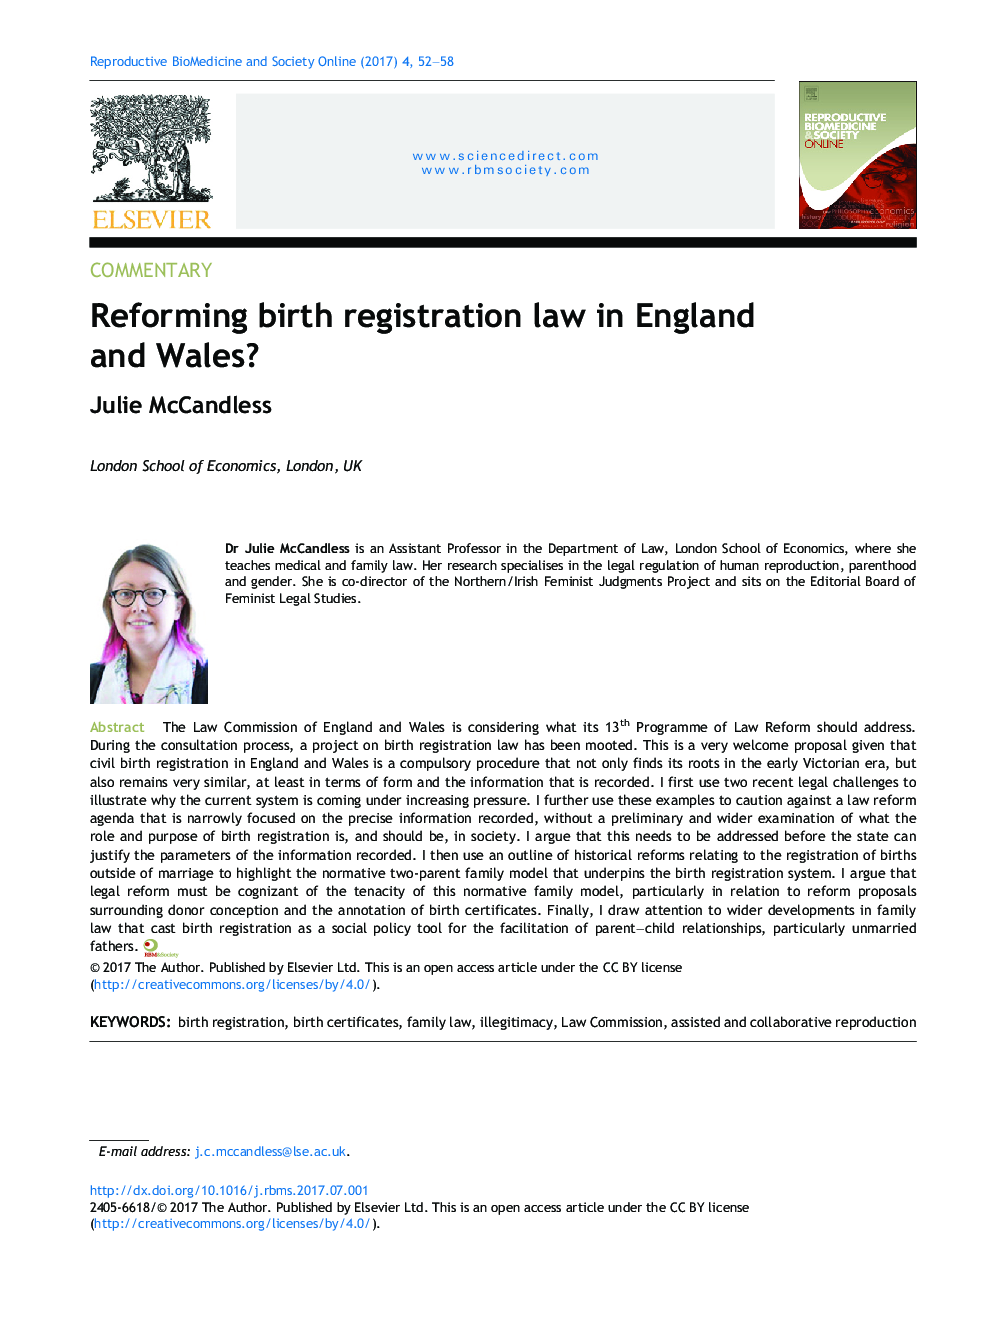 Reforming birth registration law in England and Wales?